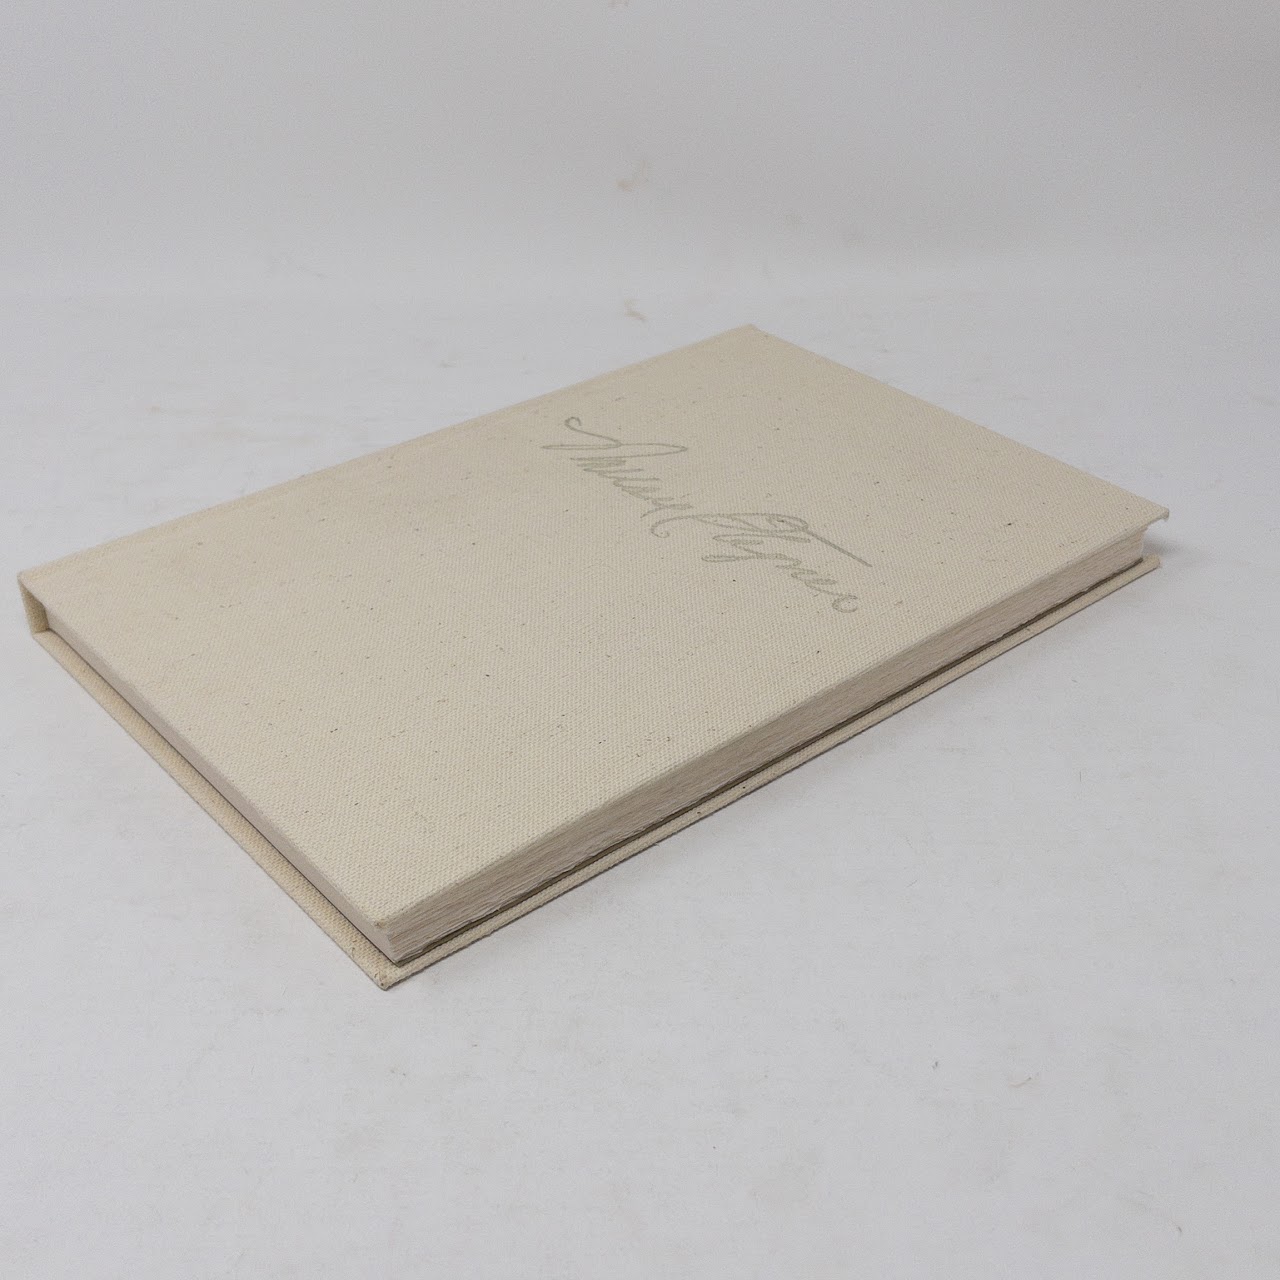 Catching the Light : Remembering Wallace Stegner Limited Edition Book With Signed Essay